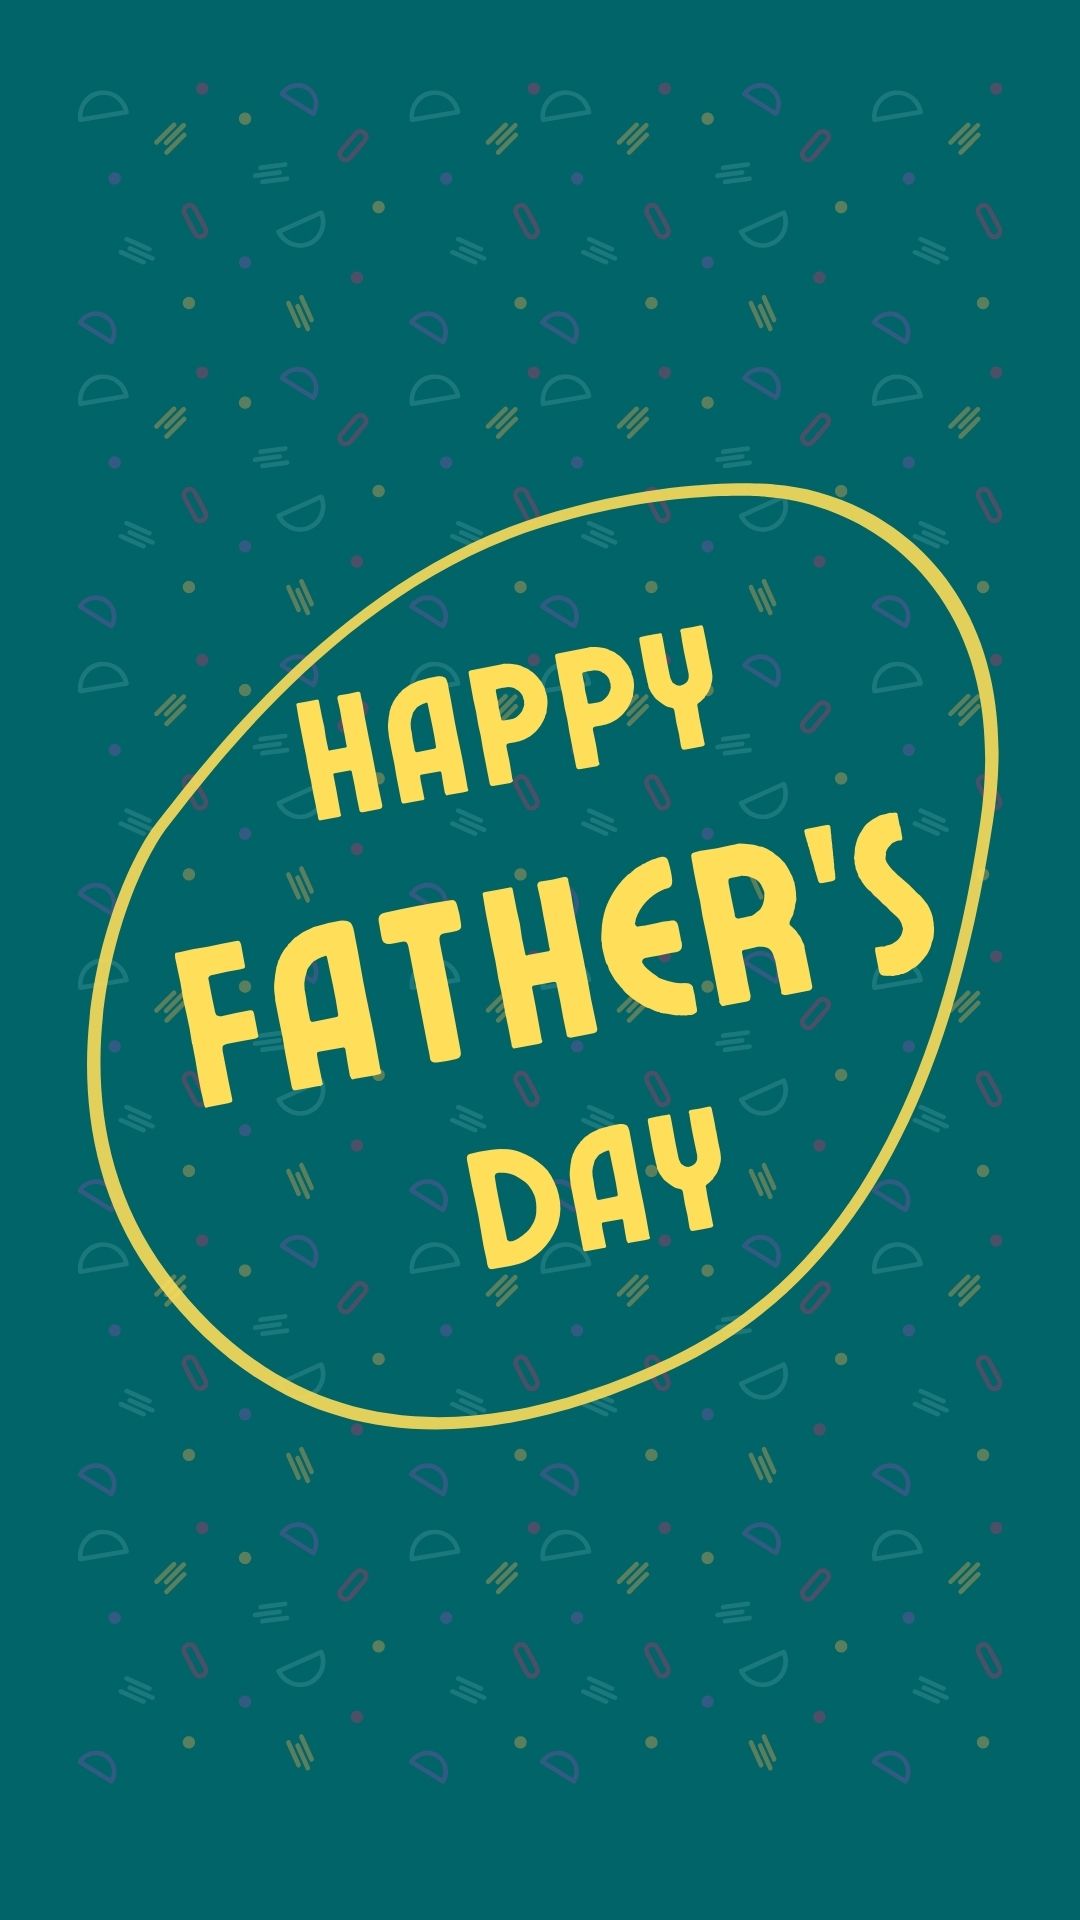 best happy father's day wishes images for instagram story (20)